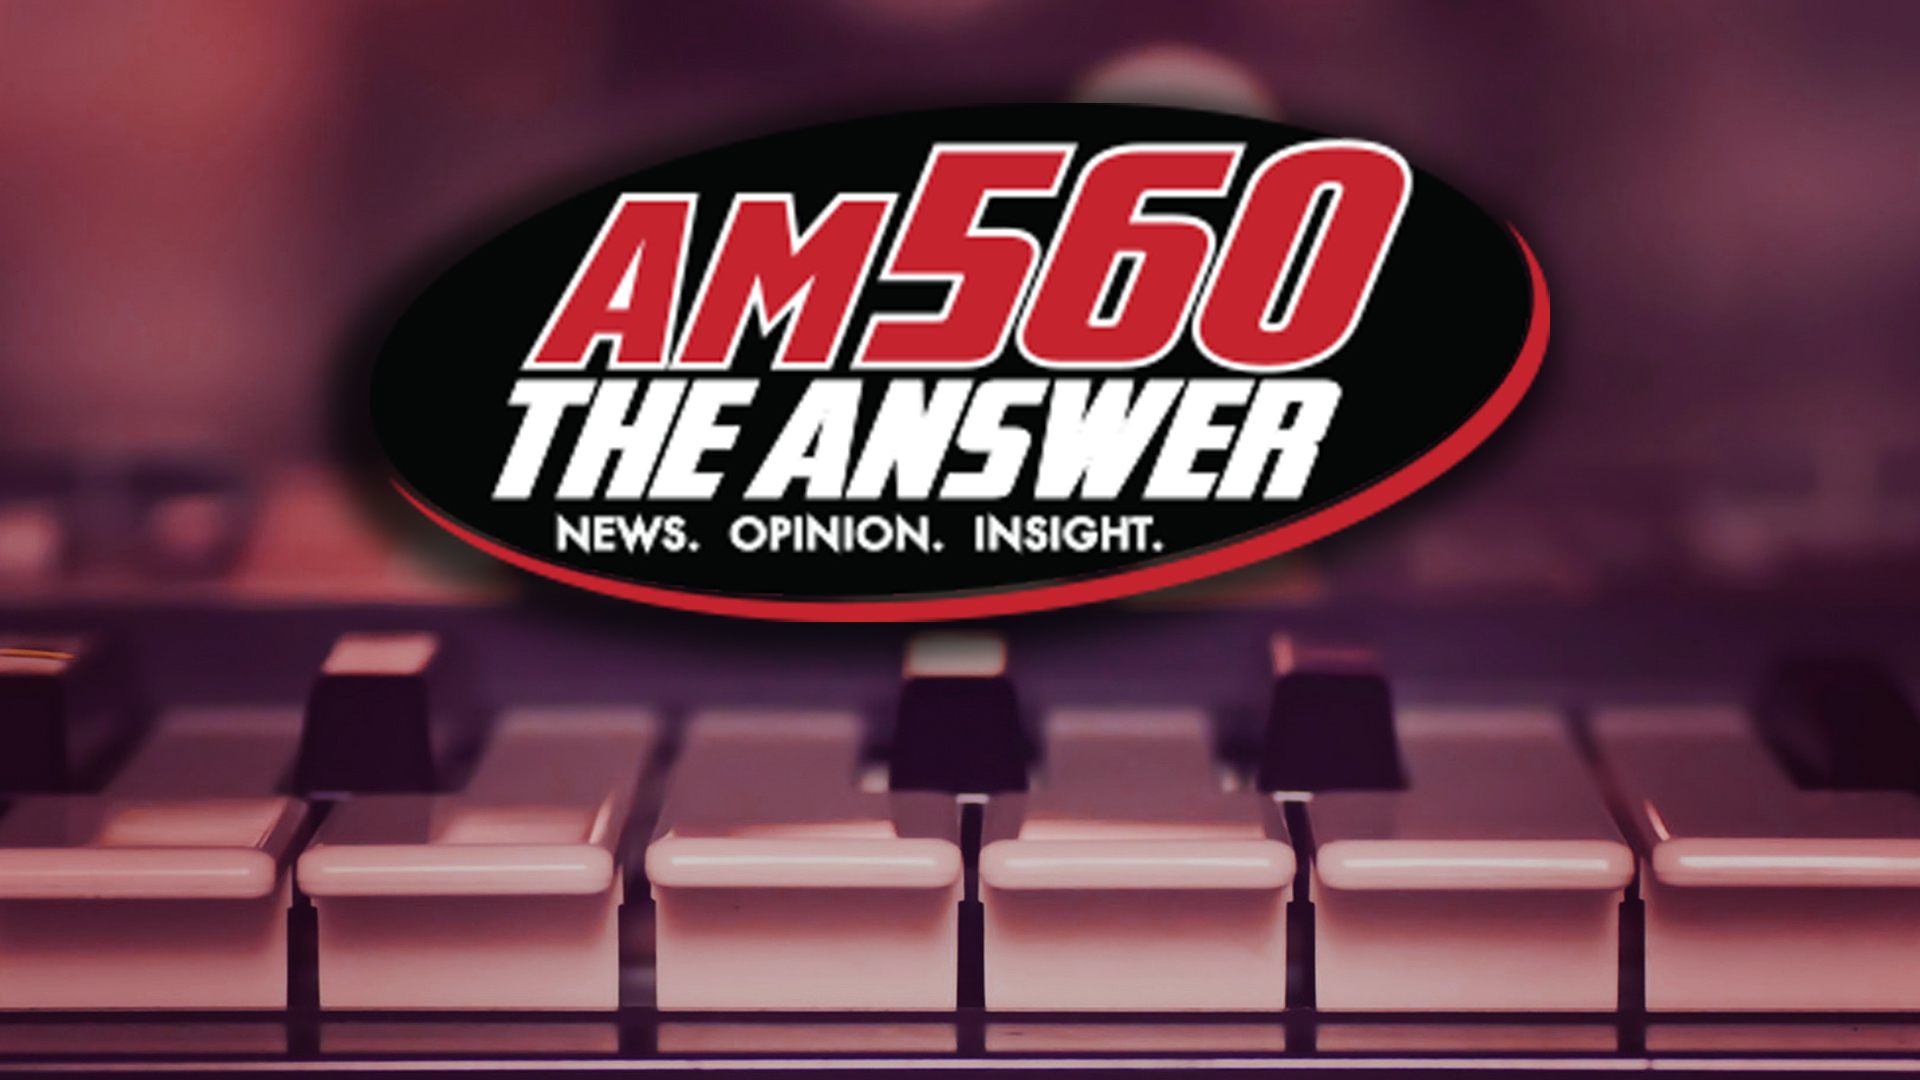 AM 560 The Answer or WIND-AM